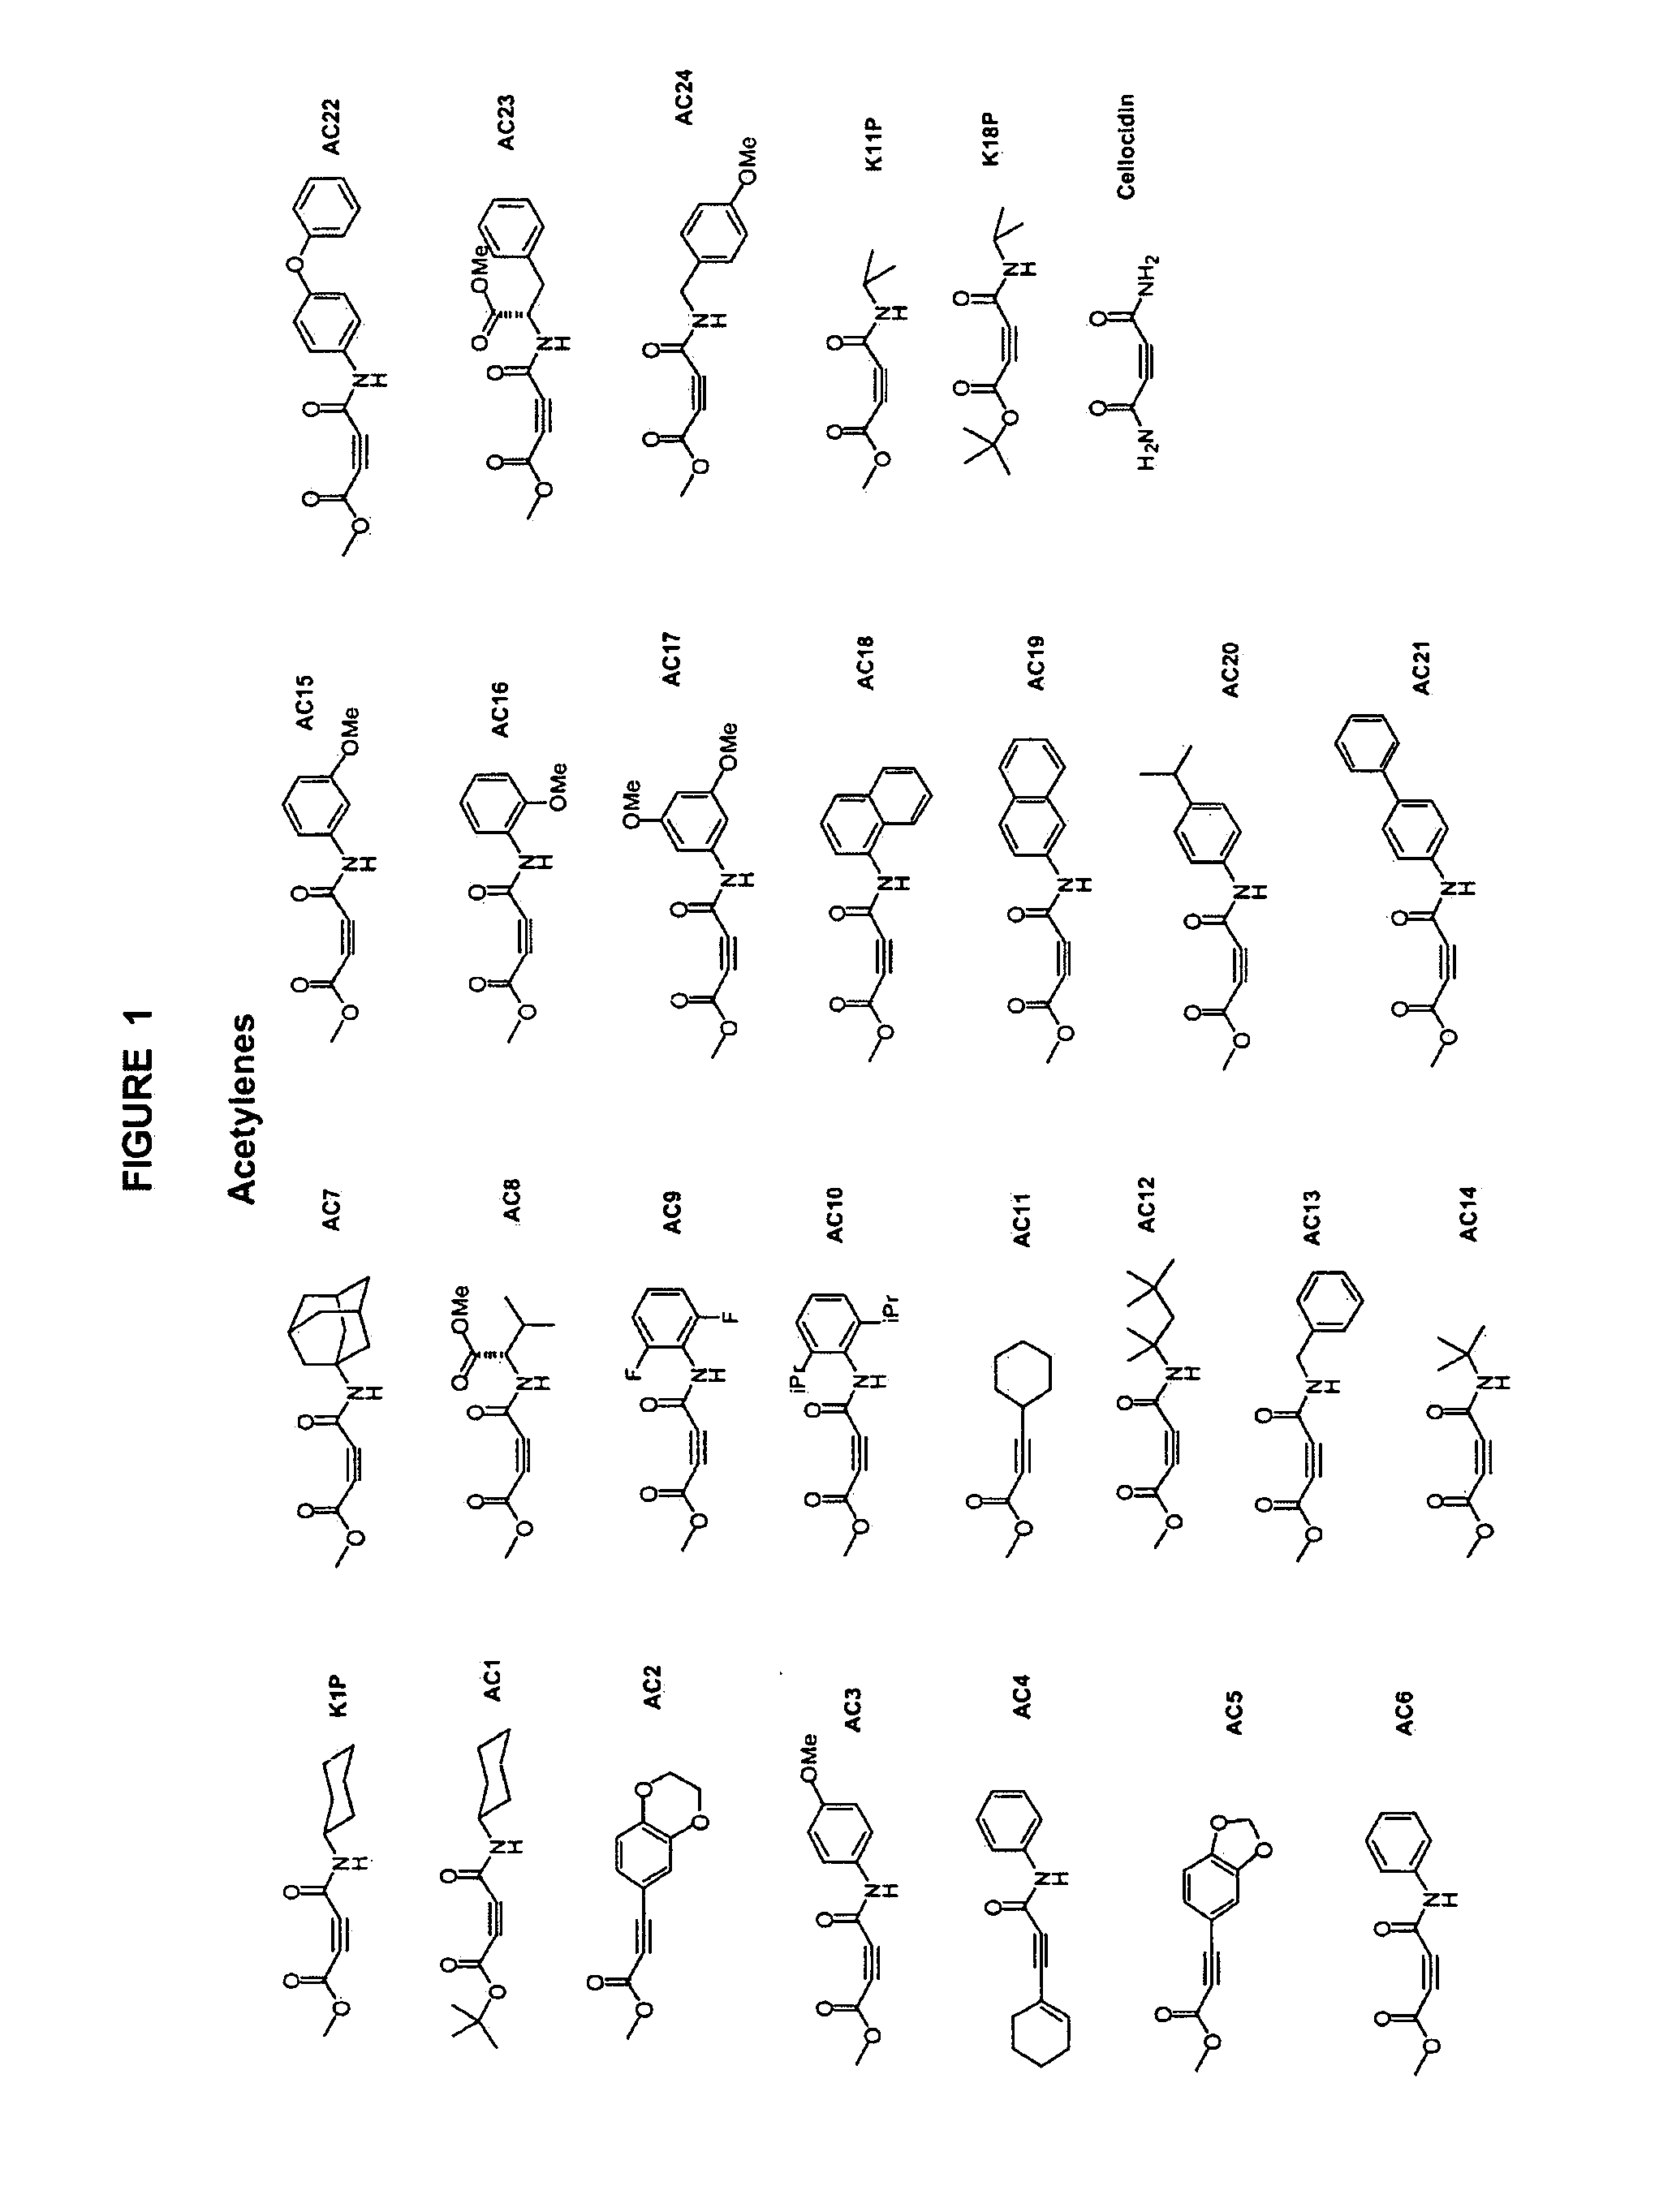 Compounds and methods for treating tumors, cancer and hyperproliferative diseases